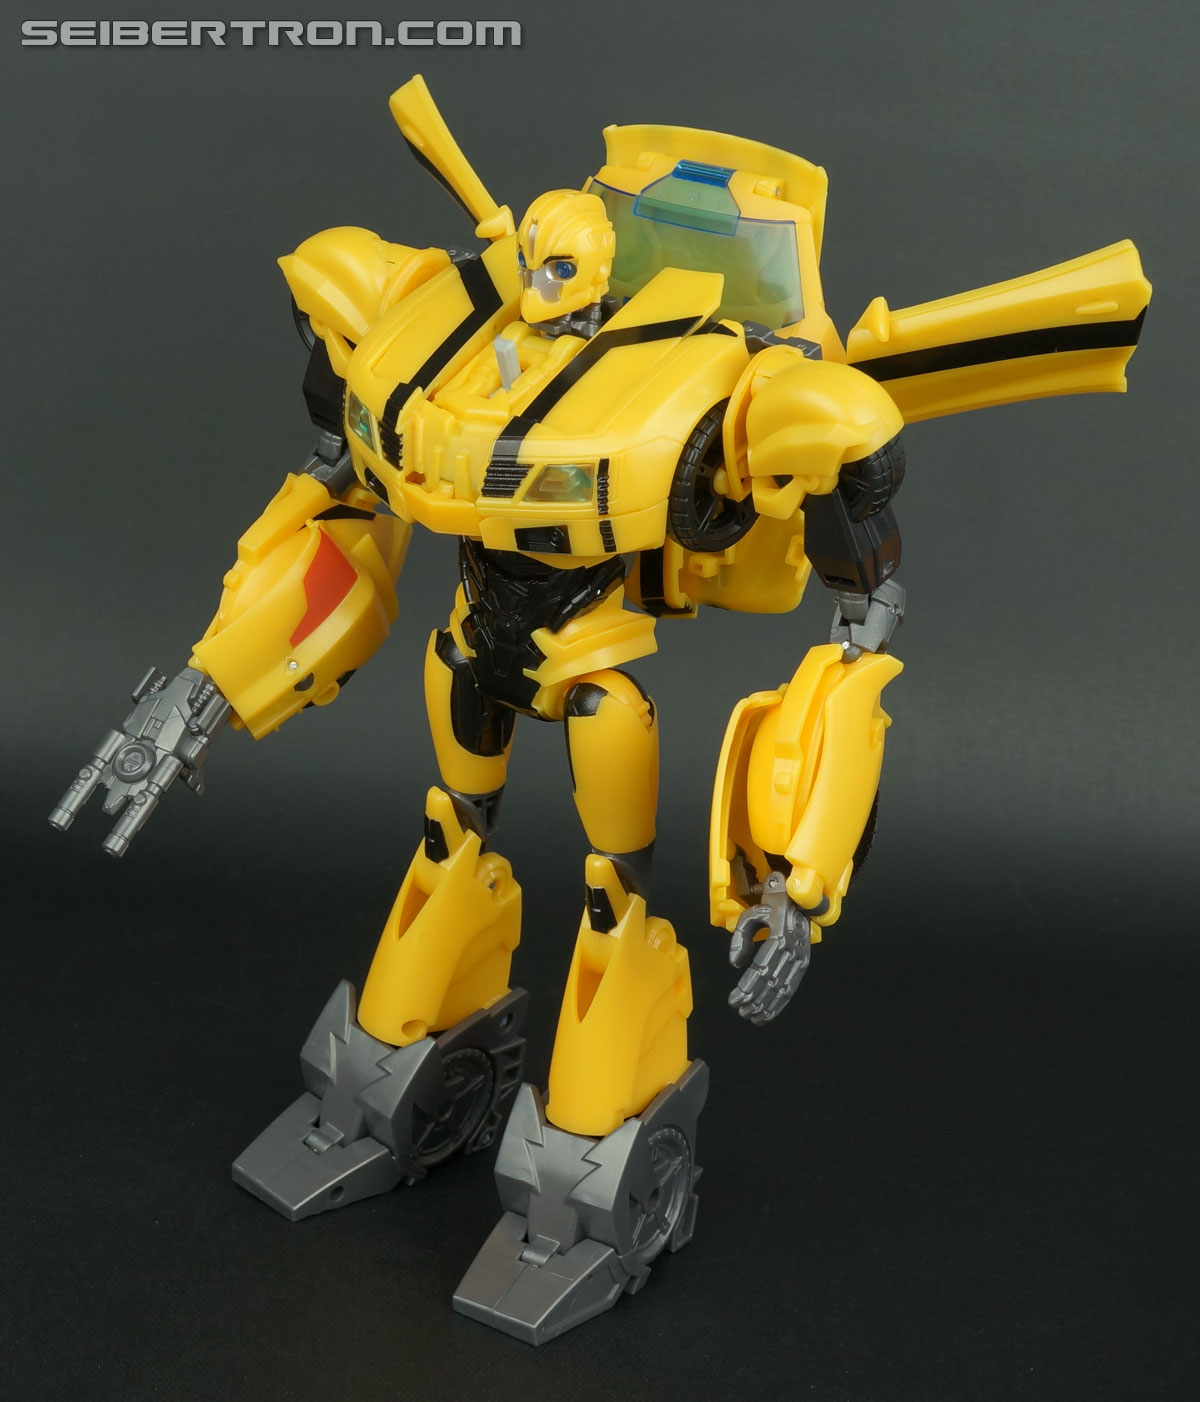 Transformers Prime: Robots In Disguise Bumblebee (Image #72 of 114)